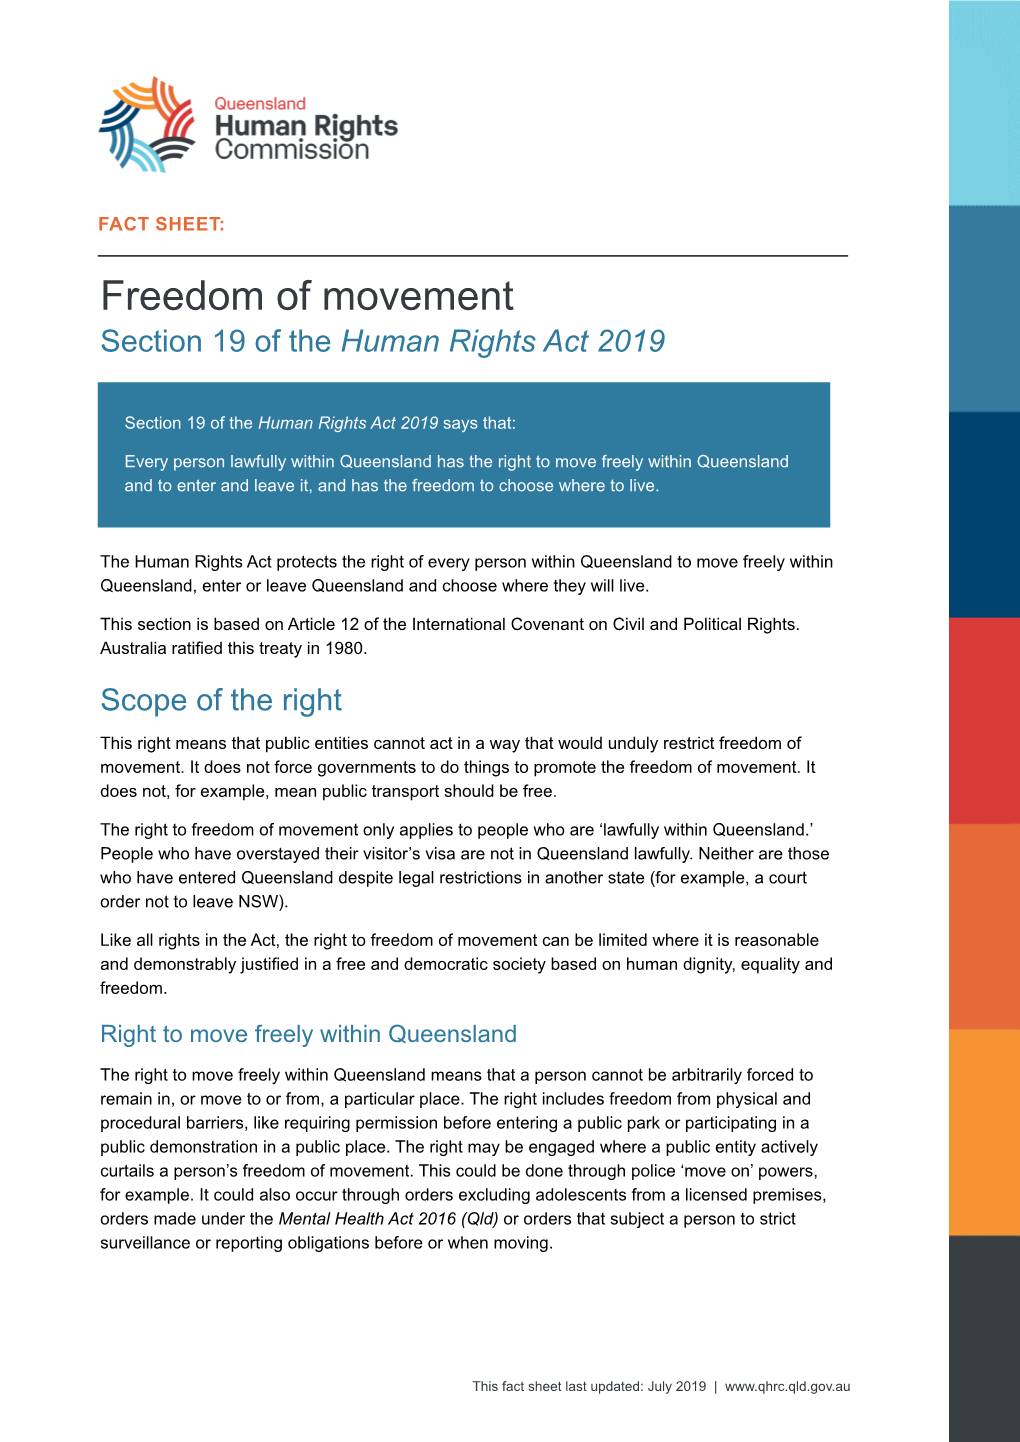 Freedom of Movement Section 19 of the Human Rights Act 2019